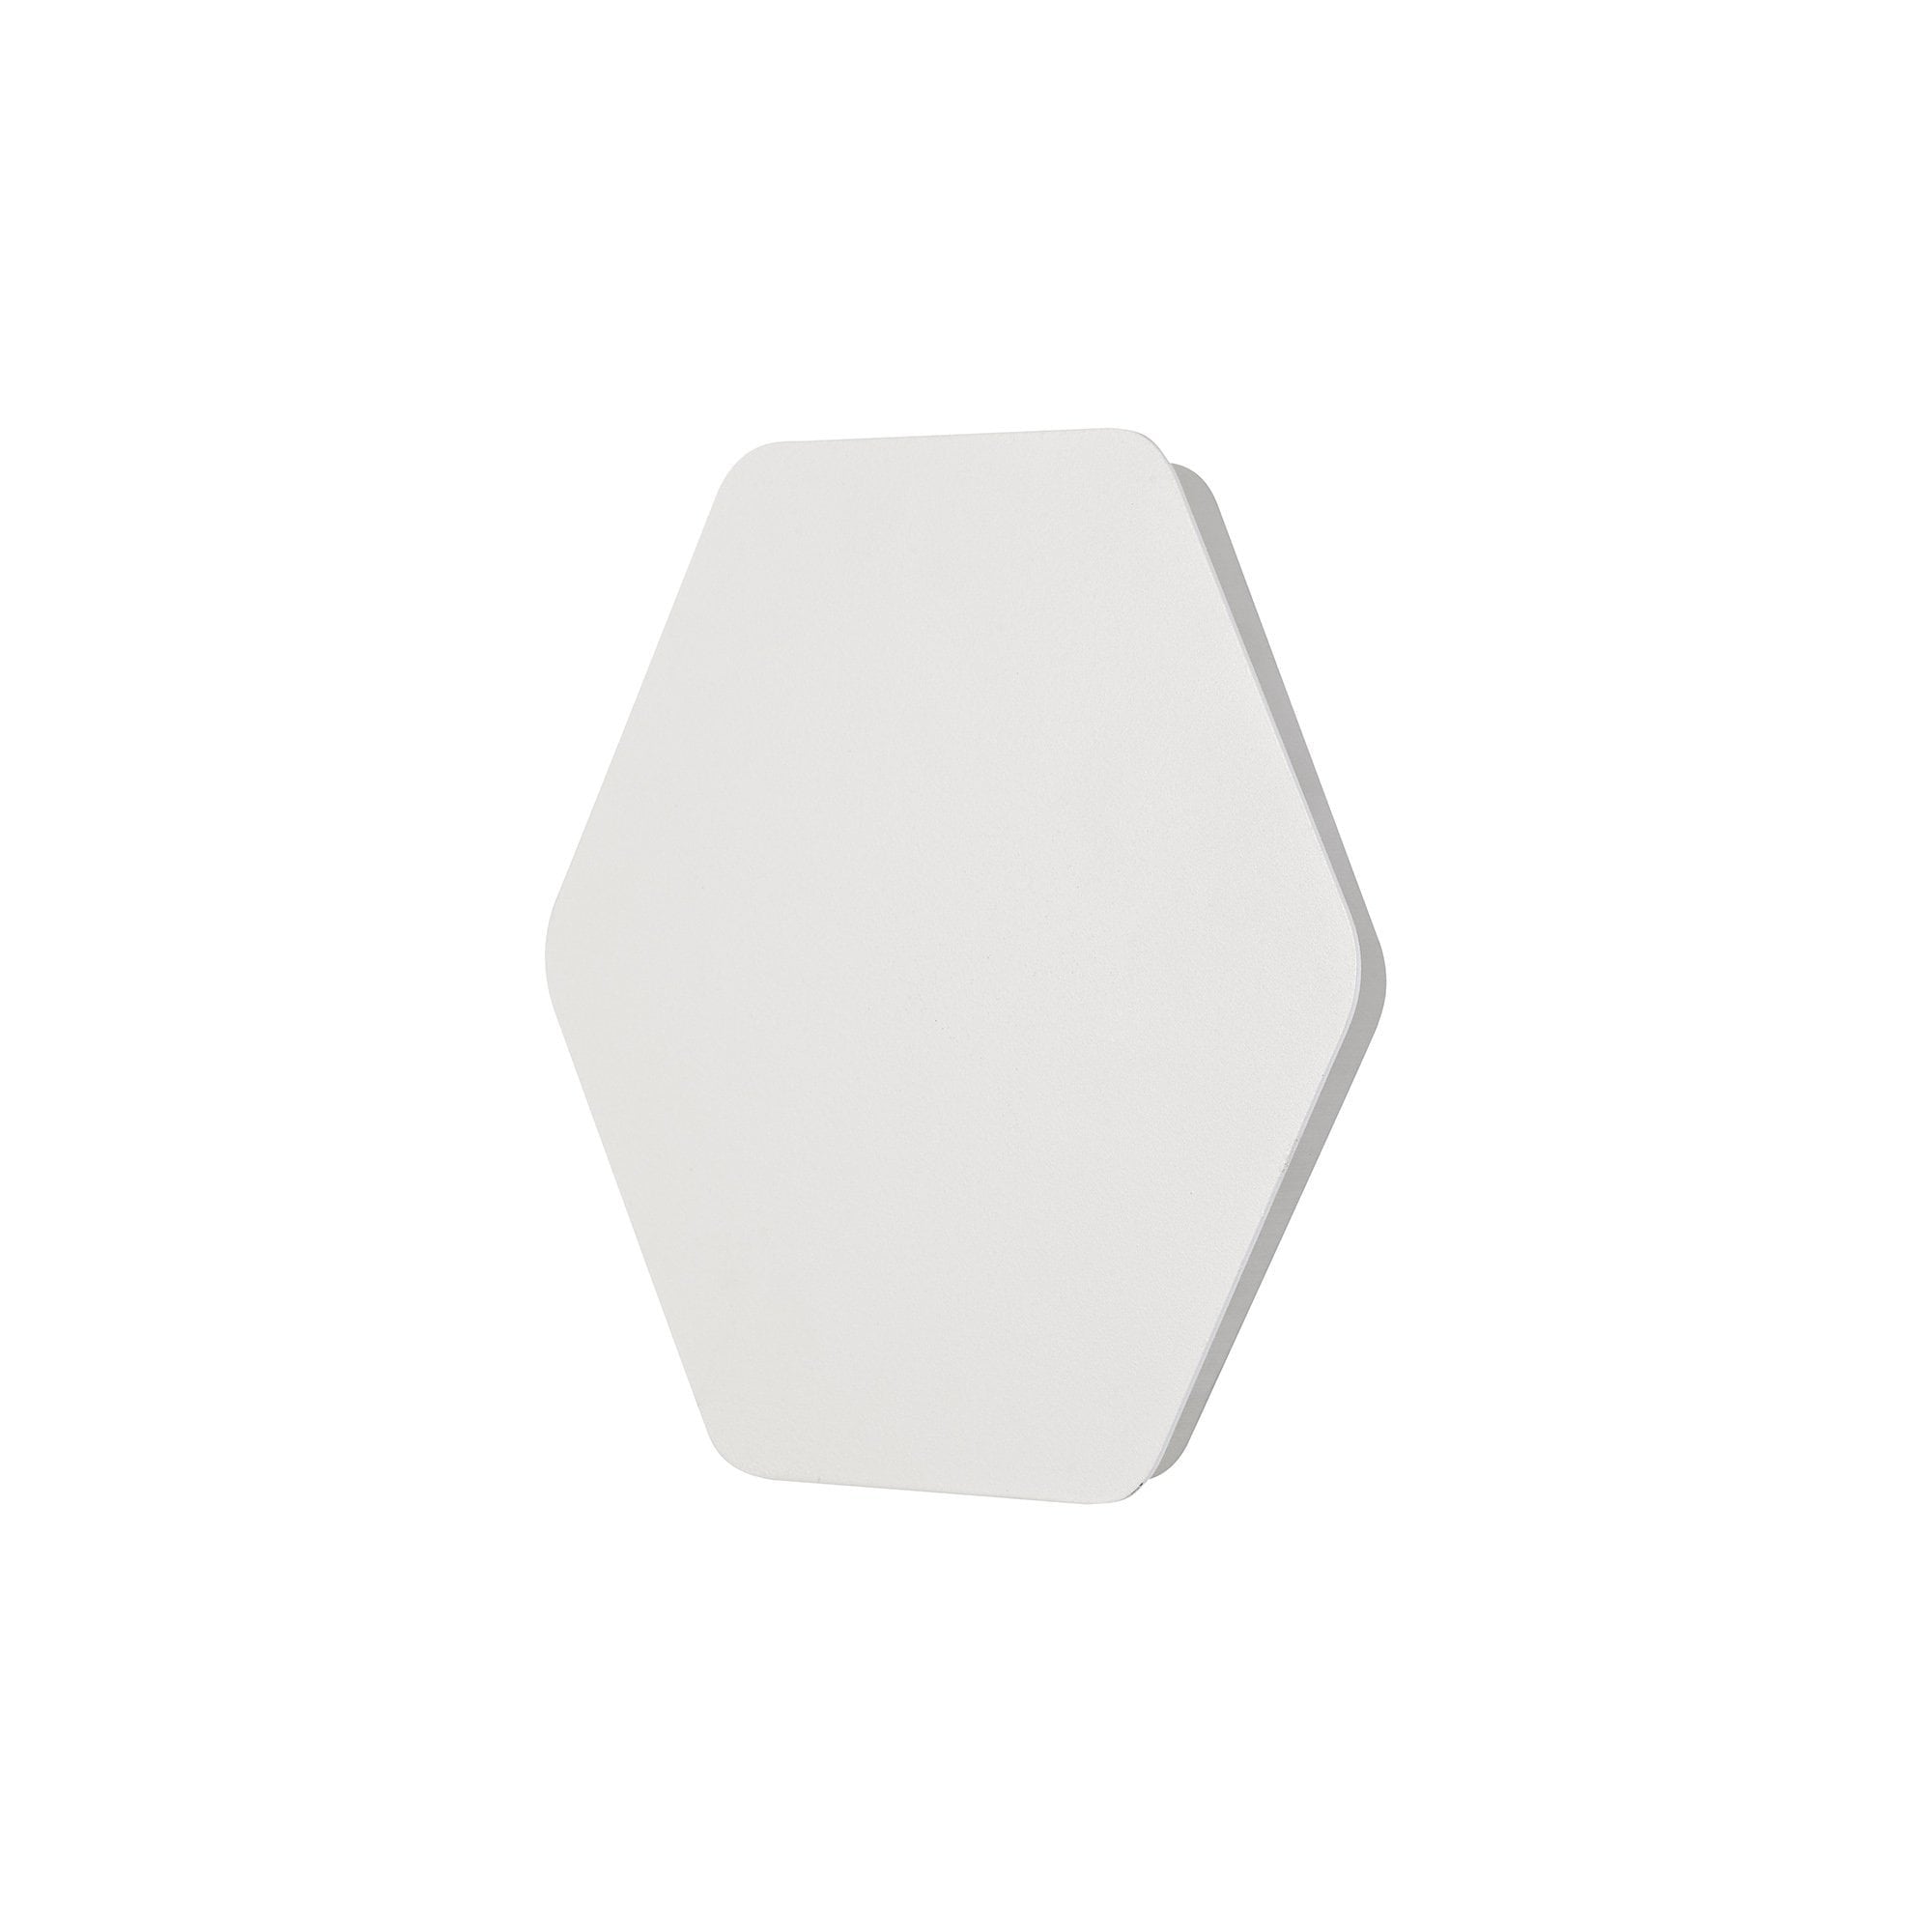 Magnetic Base Wall Lamp, 12W LED 3000K 498lm, 20/19cm Horizontal Hexagonal Centre, Sand White/Acrylic Frosted Diffuser